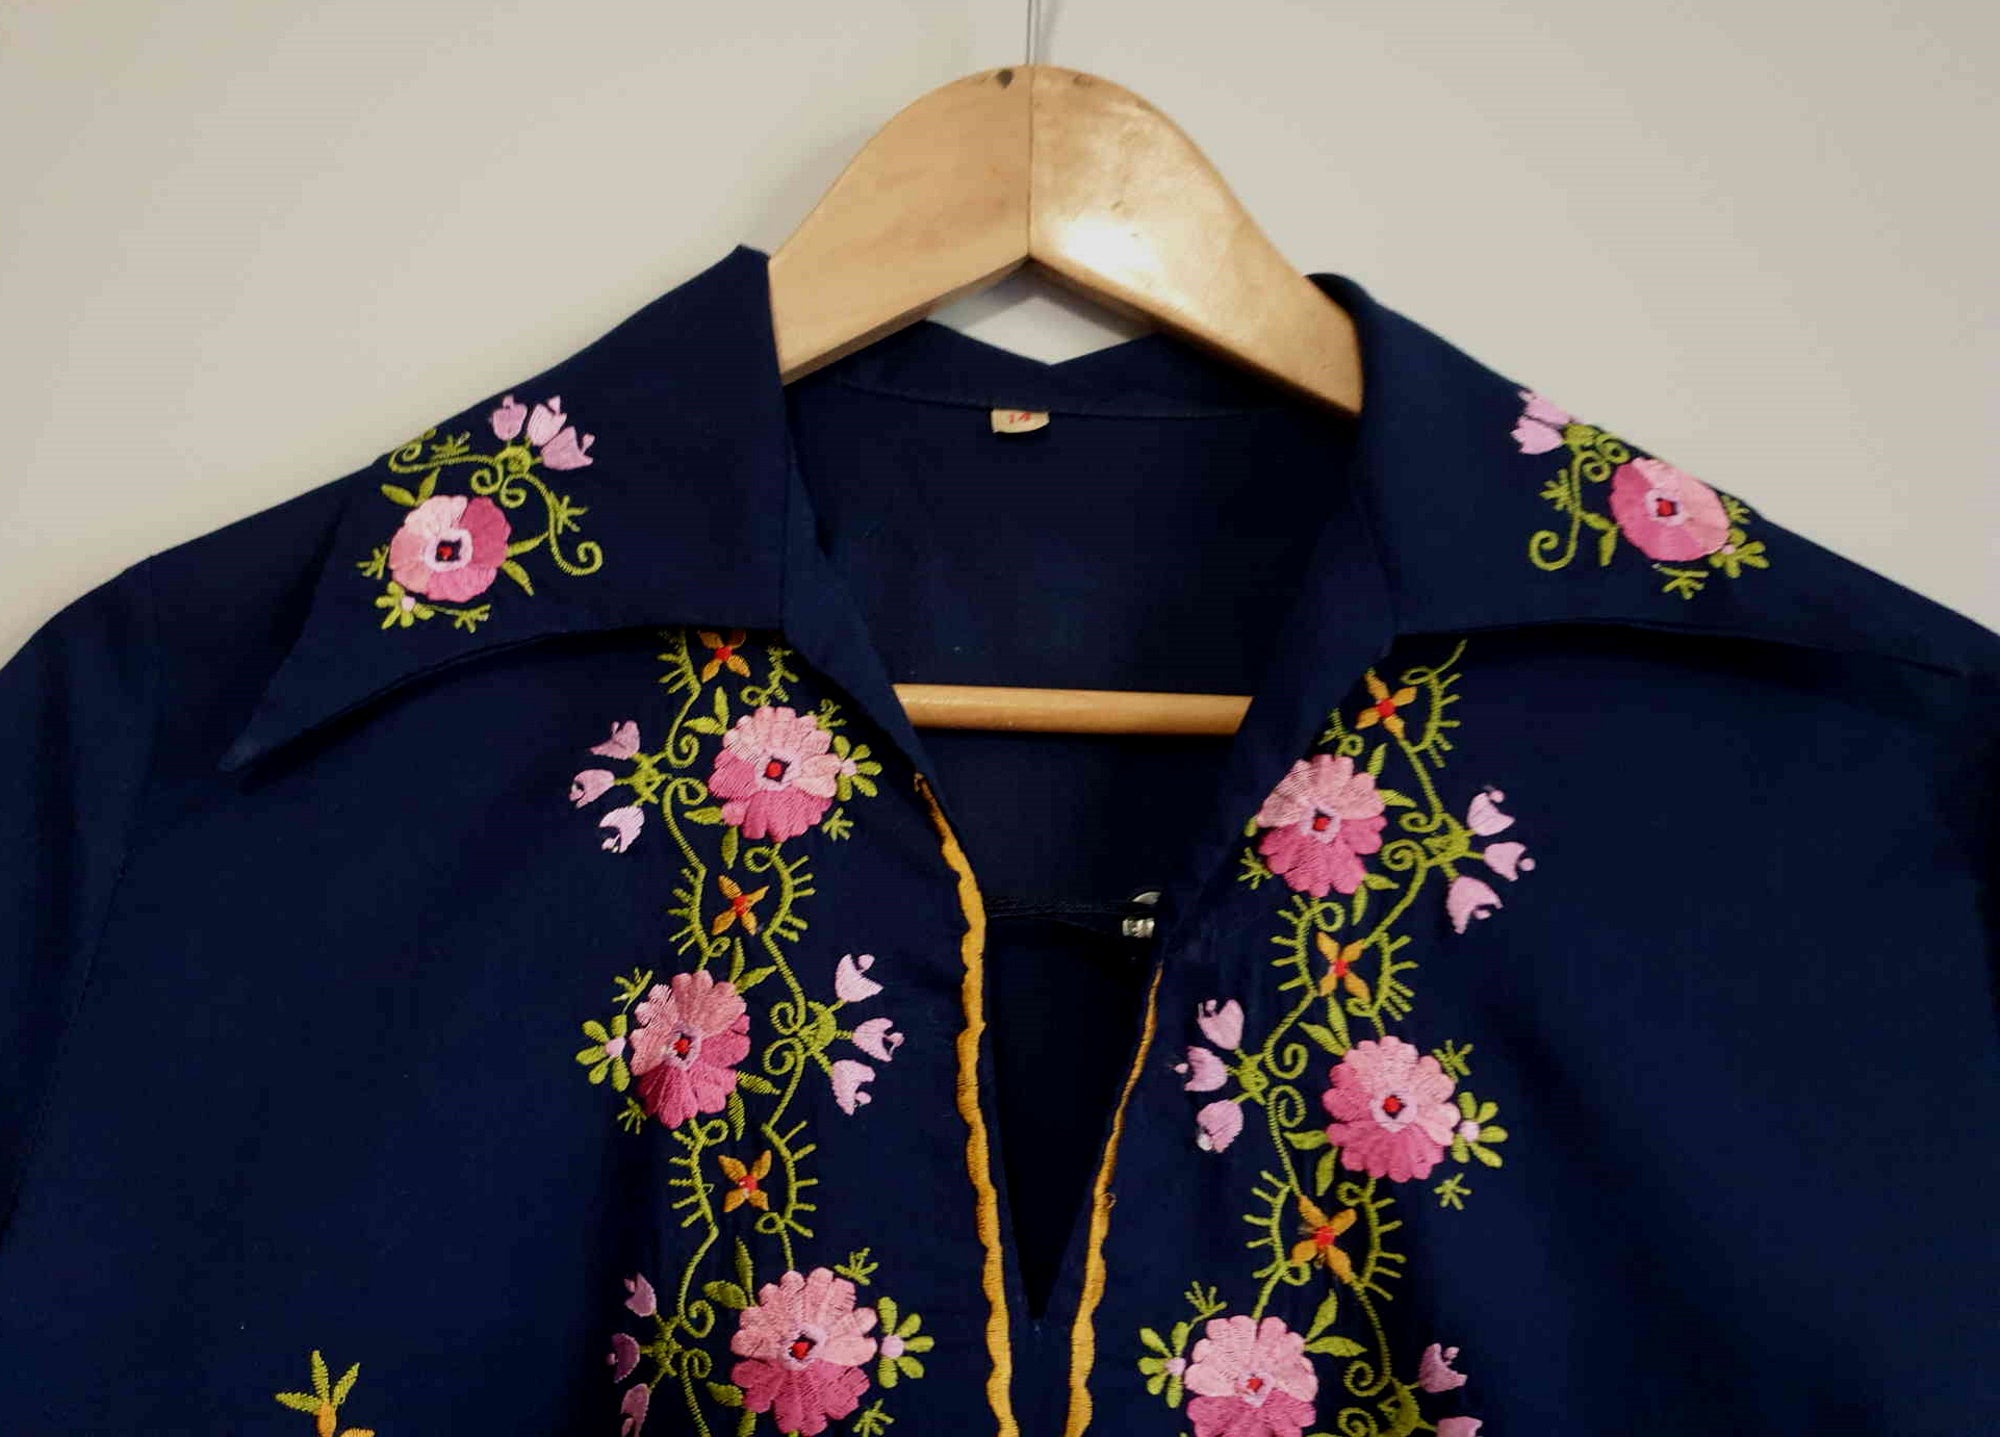 Navy Blue Pullover Embroidered Shirt - Bust 91 cm